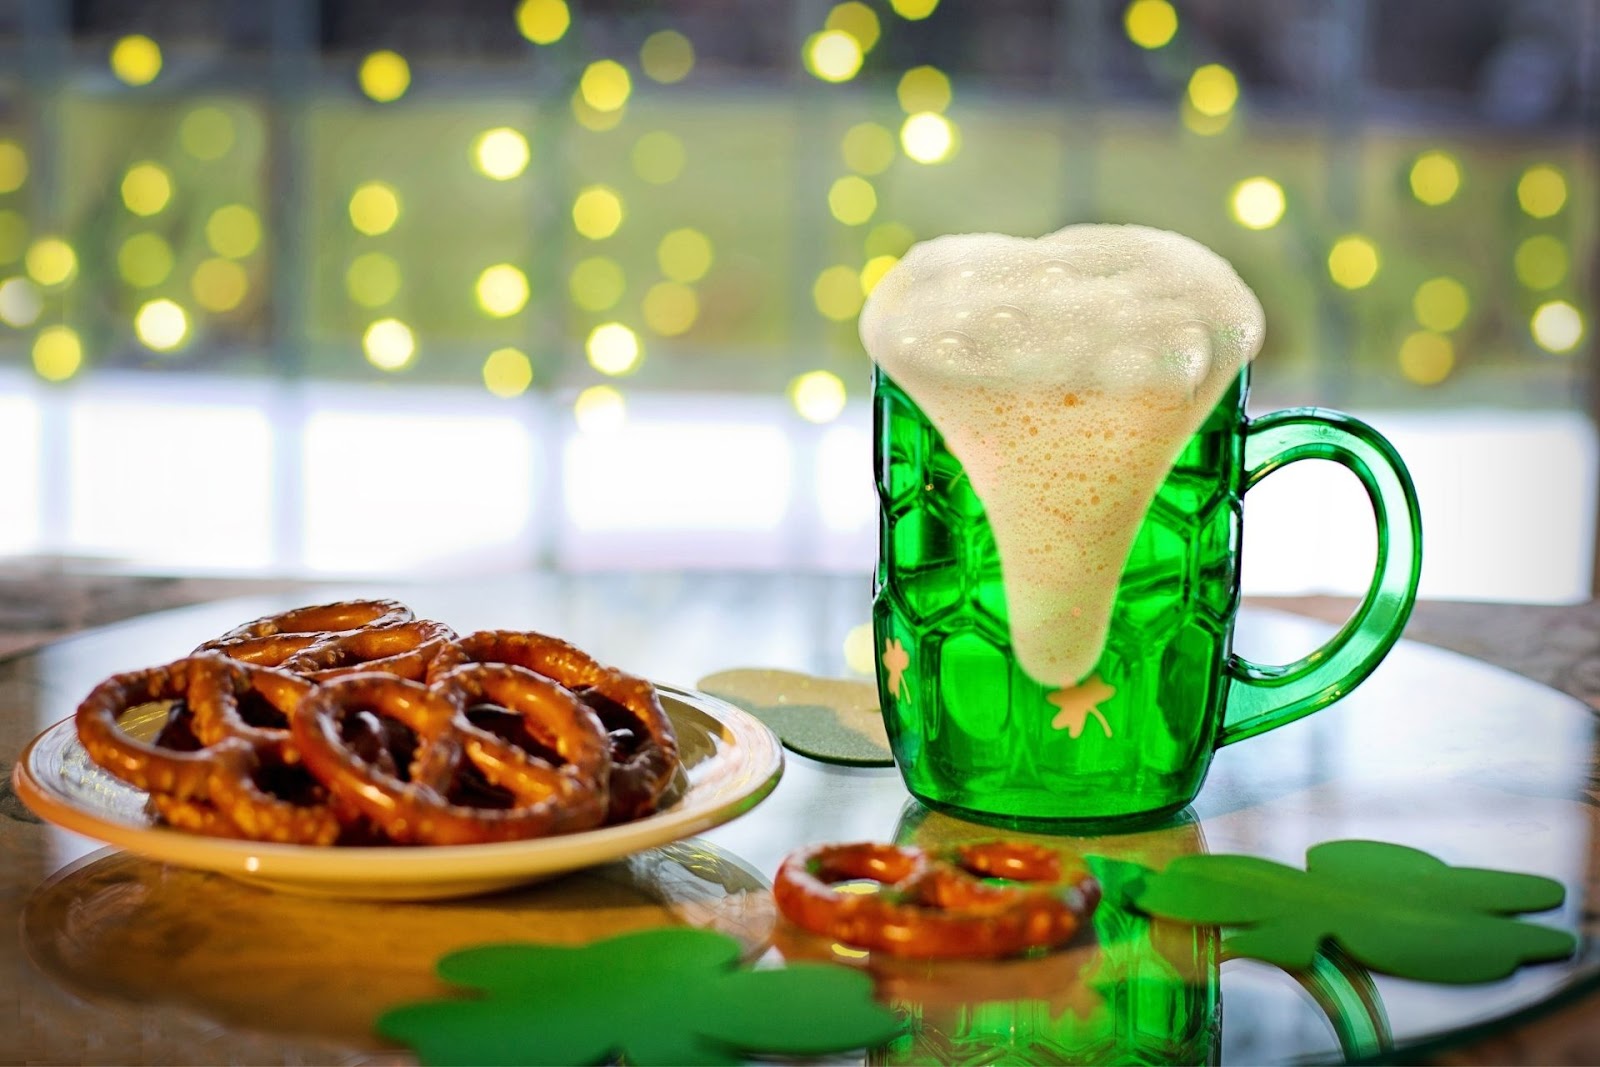 Pretzels, green beer, and shamrocks on a wooden table in front of gold fairy lights